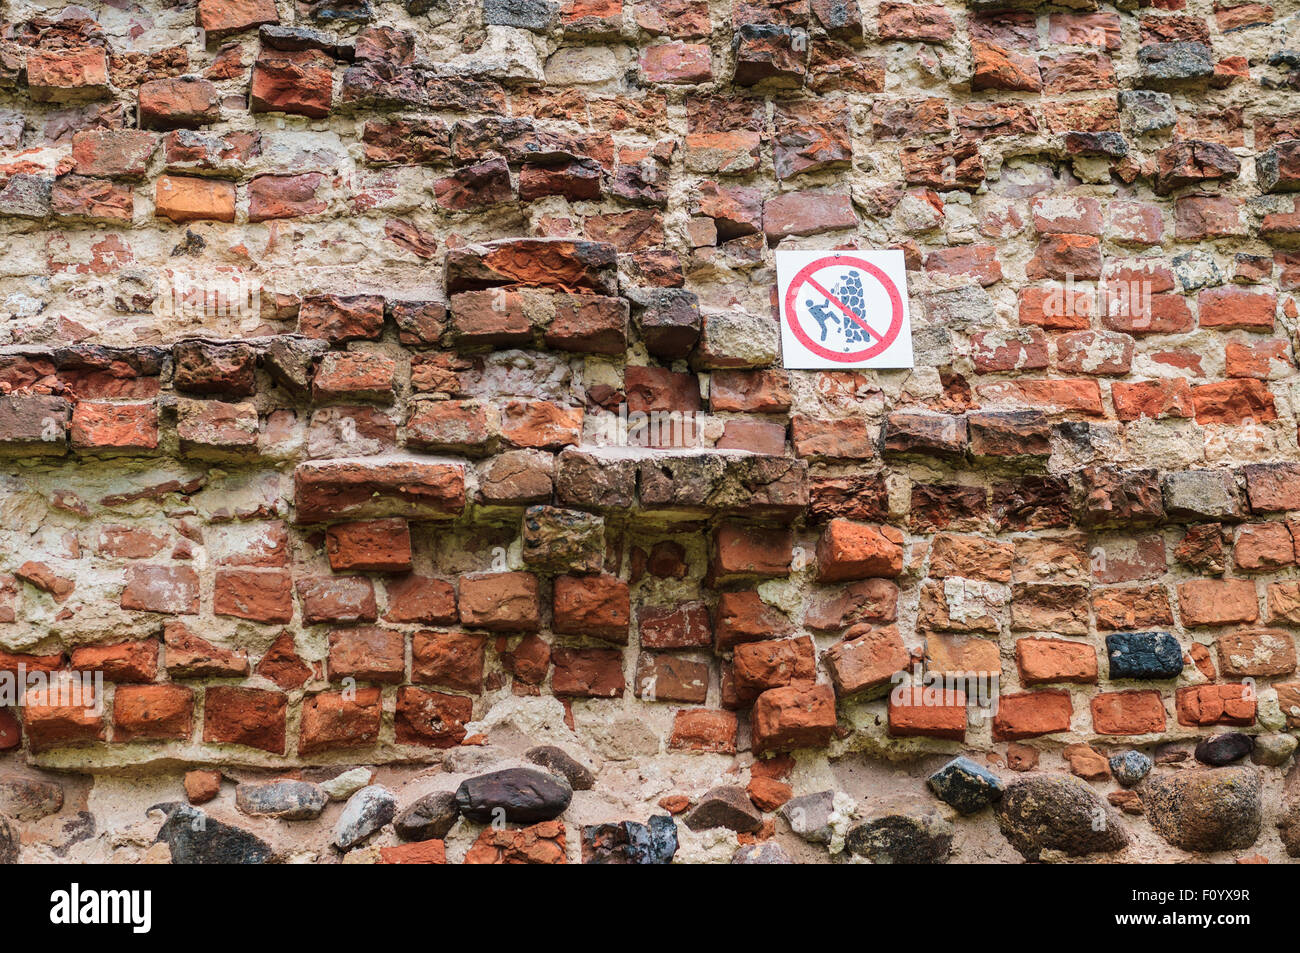 No climbing sign on old insecure wall Stock Photo